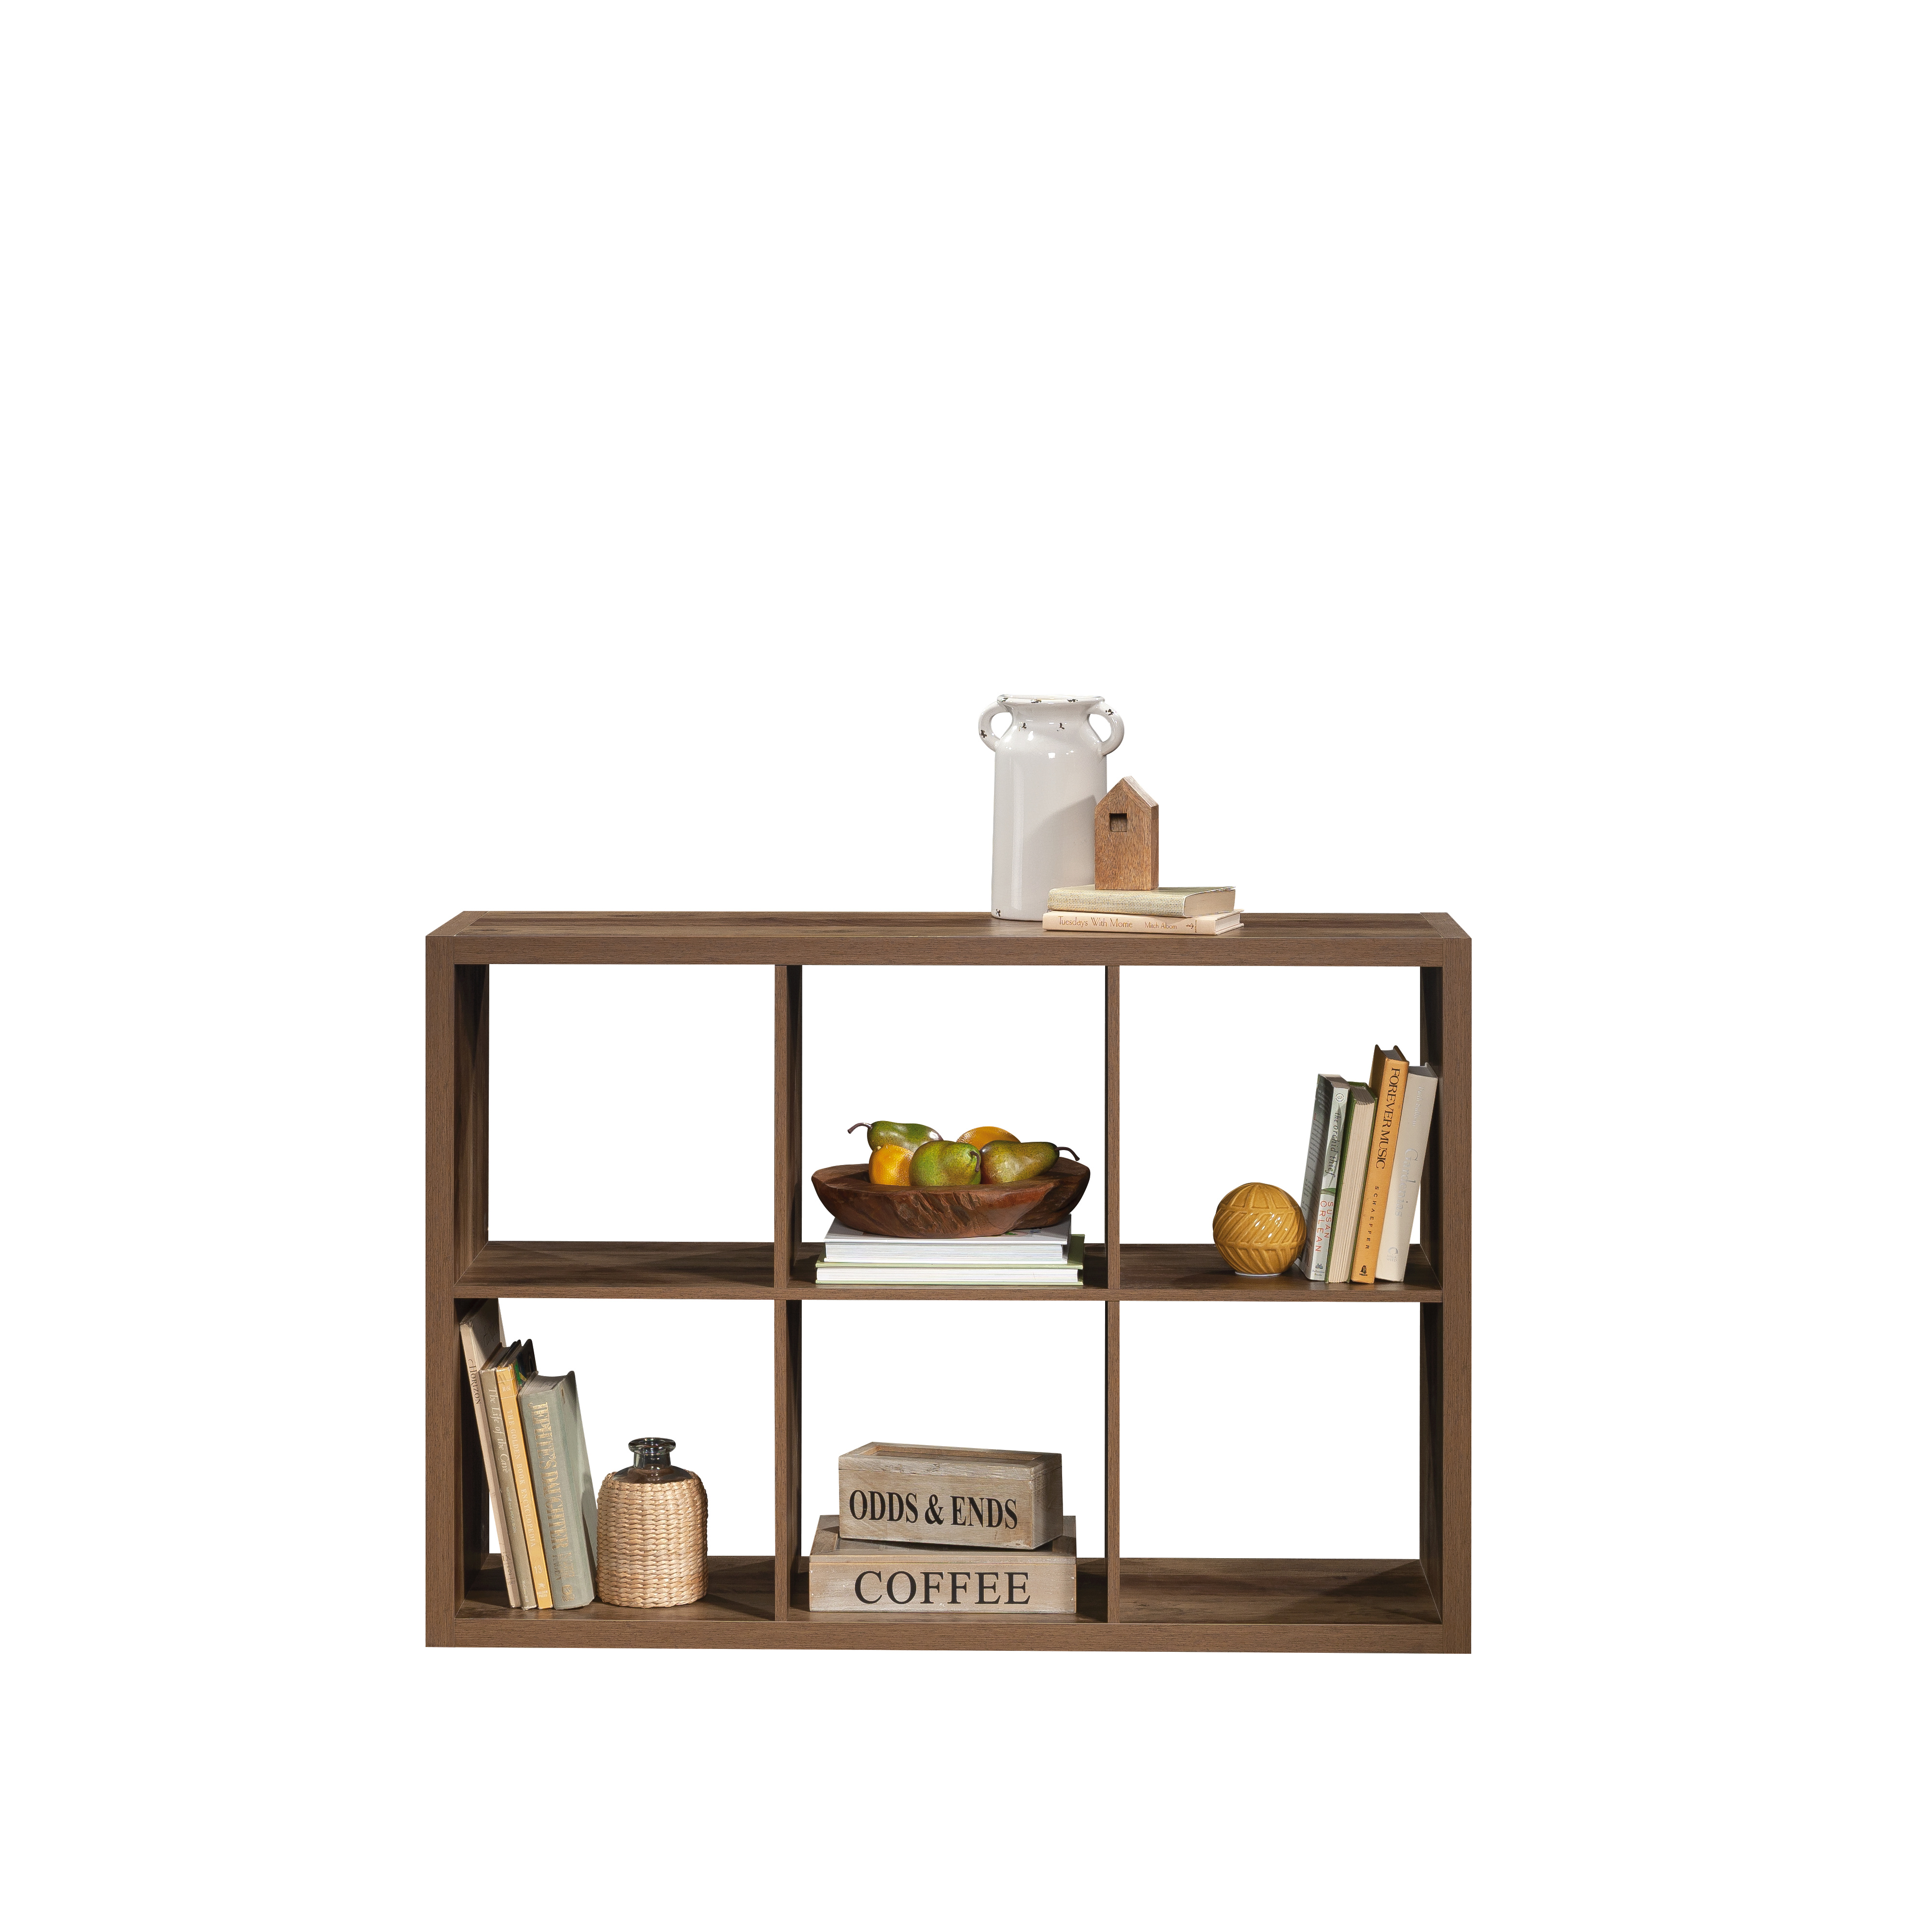 Halifax North America 6-Cubby Kids Bookcase | Mathis Home